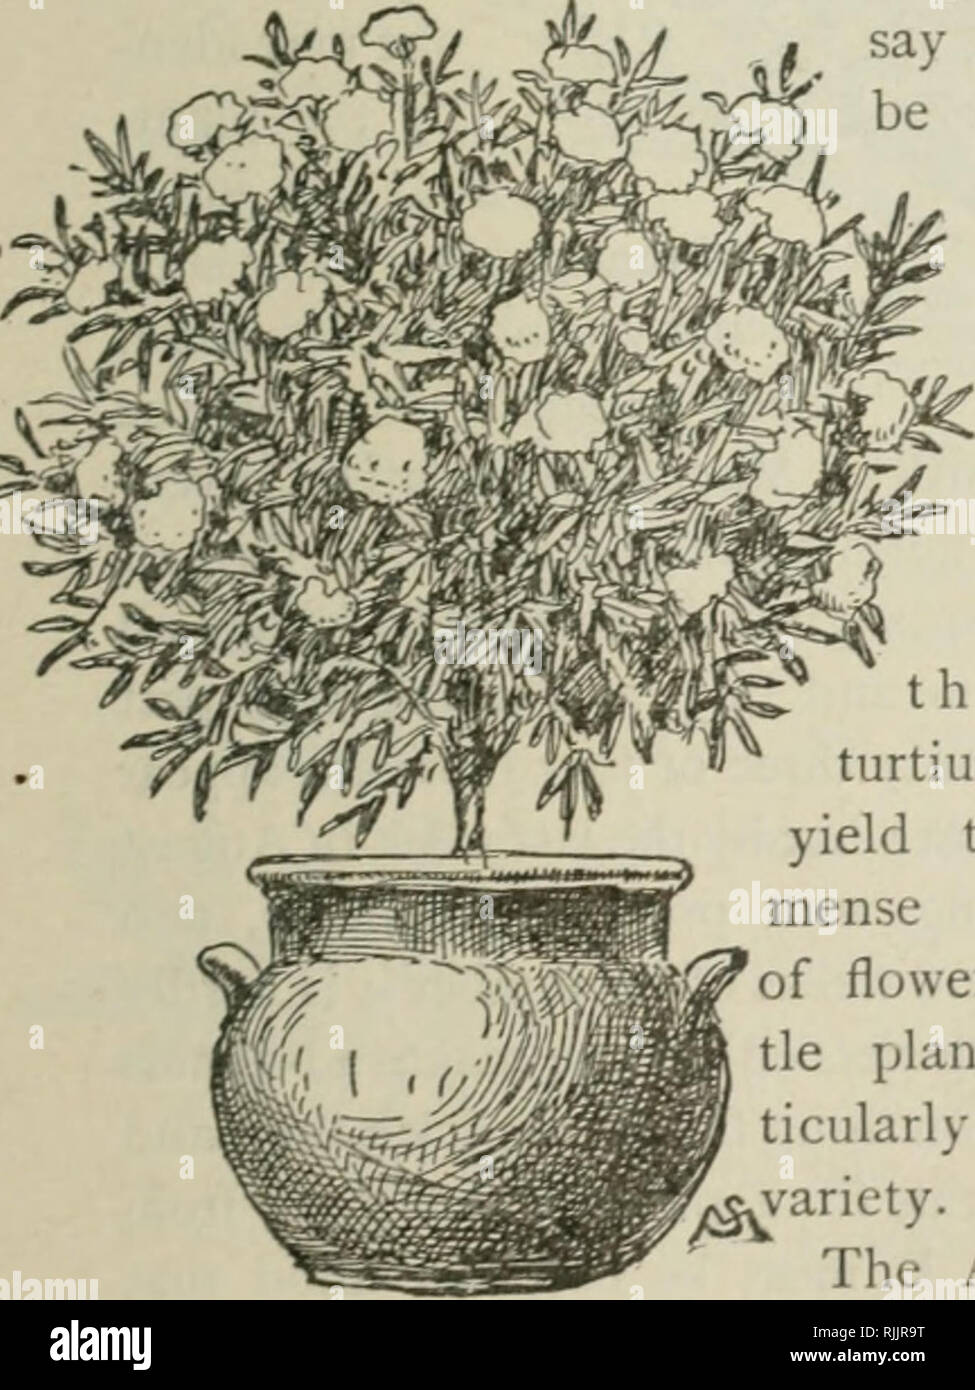 . The beautiful flower garden, its treatment with special regard for the picturesque. Written and embellished with numerous illustrations by F. Schuyler Mathews. With notes on practical floriculture by A.H. Fewkes. Floriculture. MARIGOLD (Tagetes). adapted to a position where its pretty leafage and bean- blossom shaped flowerets will show off against a dark back- ground. The plant grows to a spreading size and its flowers are daintily tinged with j^ale lake, magenta, solferino, and blue-purple. The white is less interesting to me; I prefer the Lupin in mixed variety, as its variations in color Stock Photo